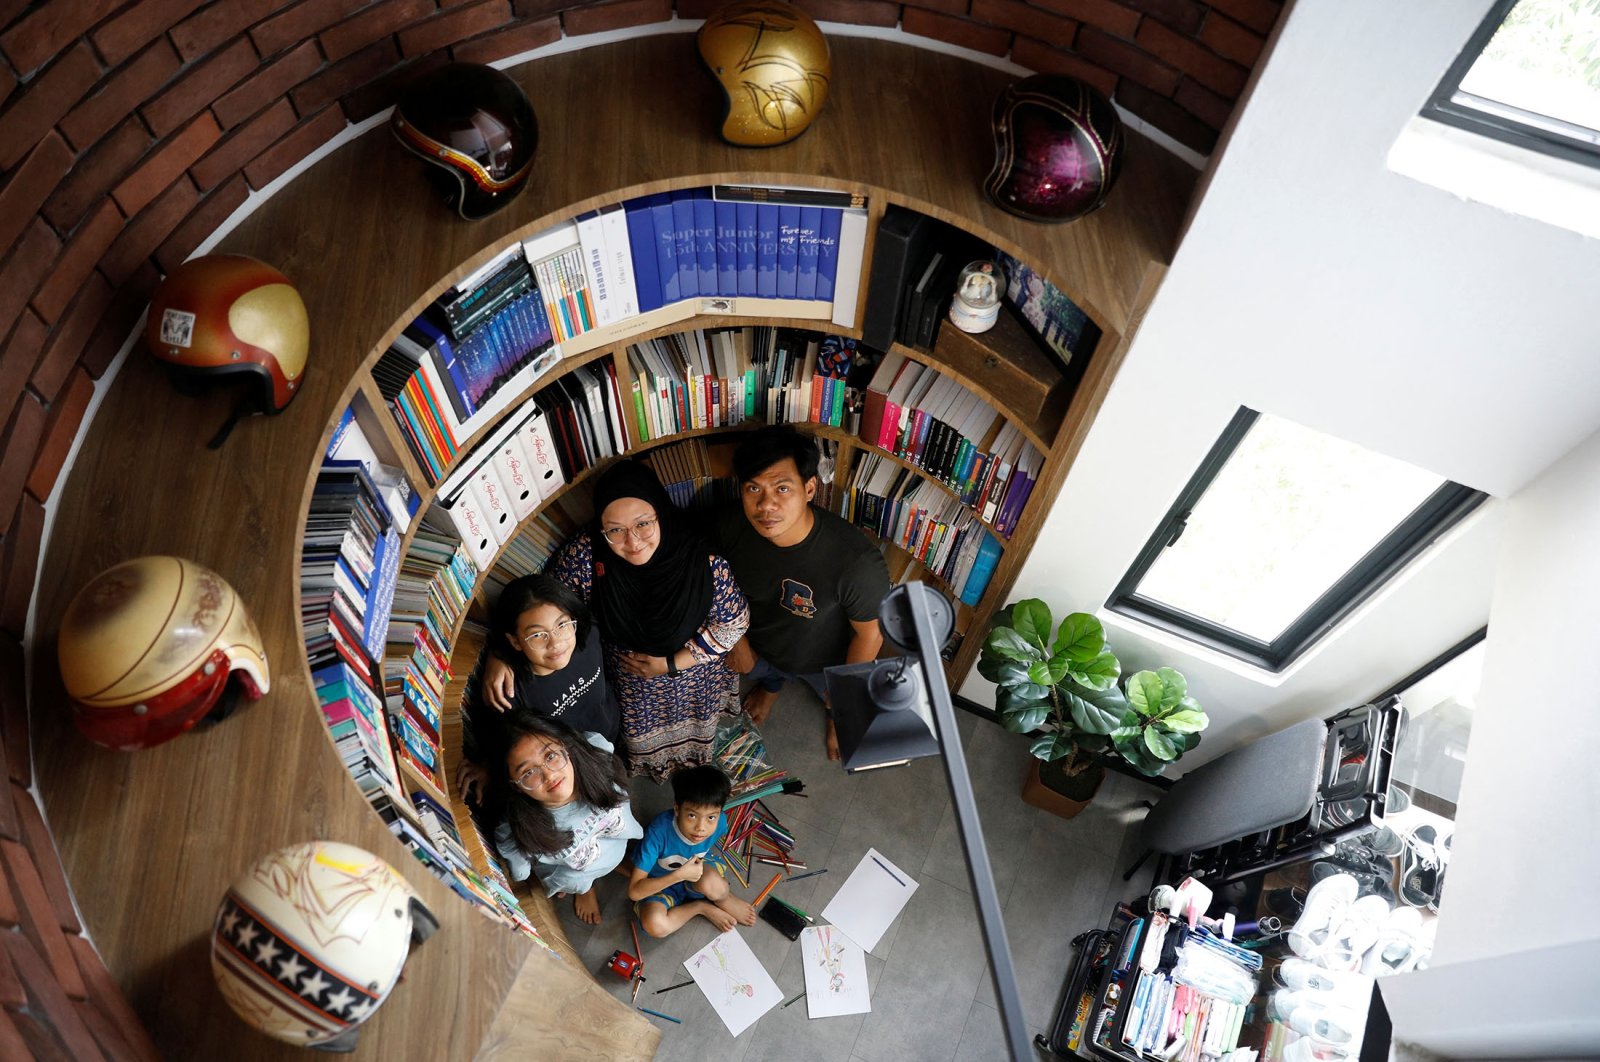 Kamal, 40, and Sri, 40, pose with their children Ayumi, 14, Tiara, 13, and Kazril, 7, at a home library area inspired by Harry Potter movies, in their 37-year-old executive maisonette public housing apartment in Singapore, May 3, 2021. (Reuters Photo)